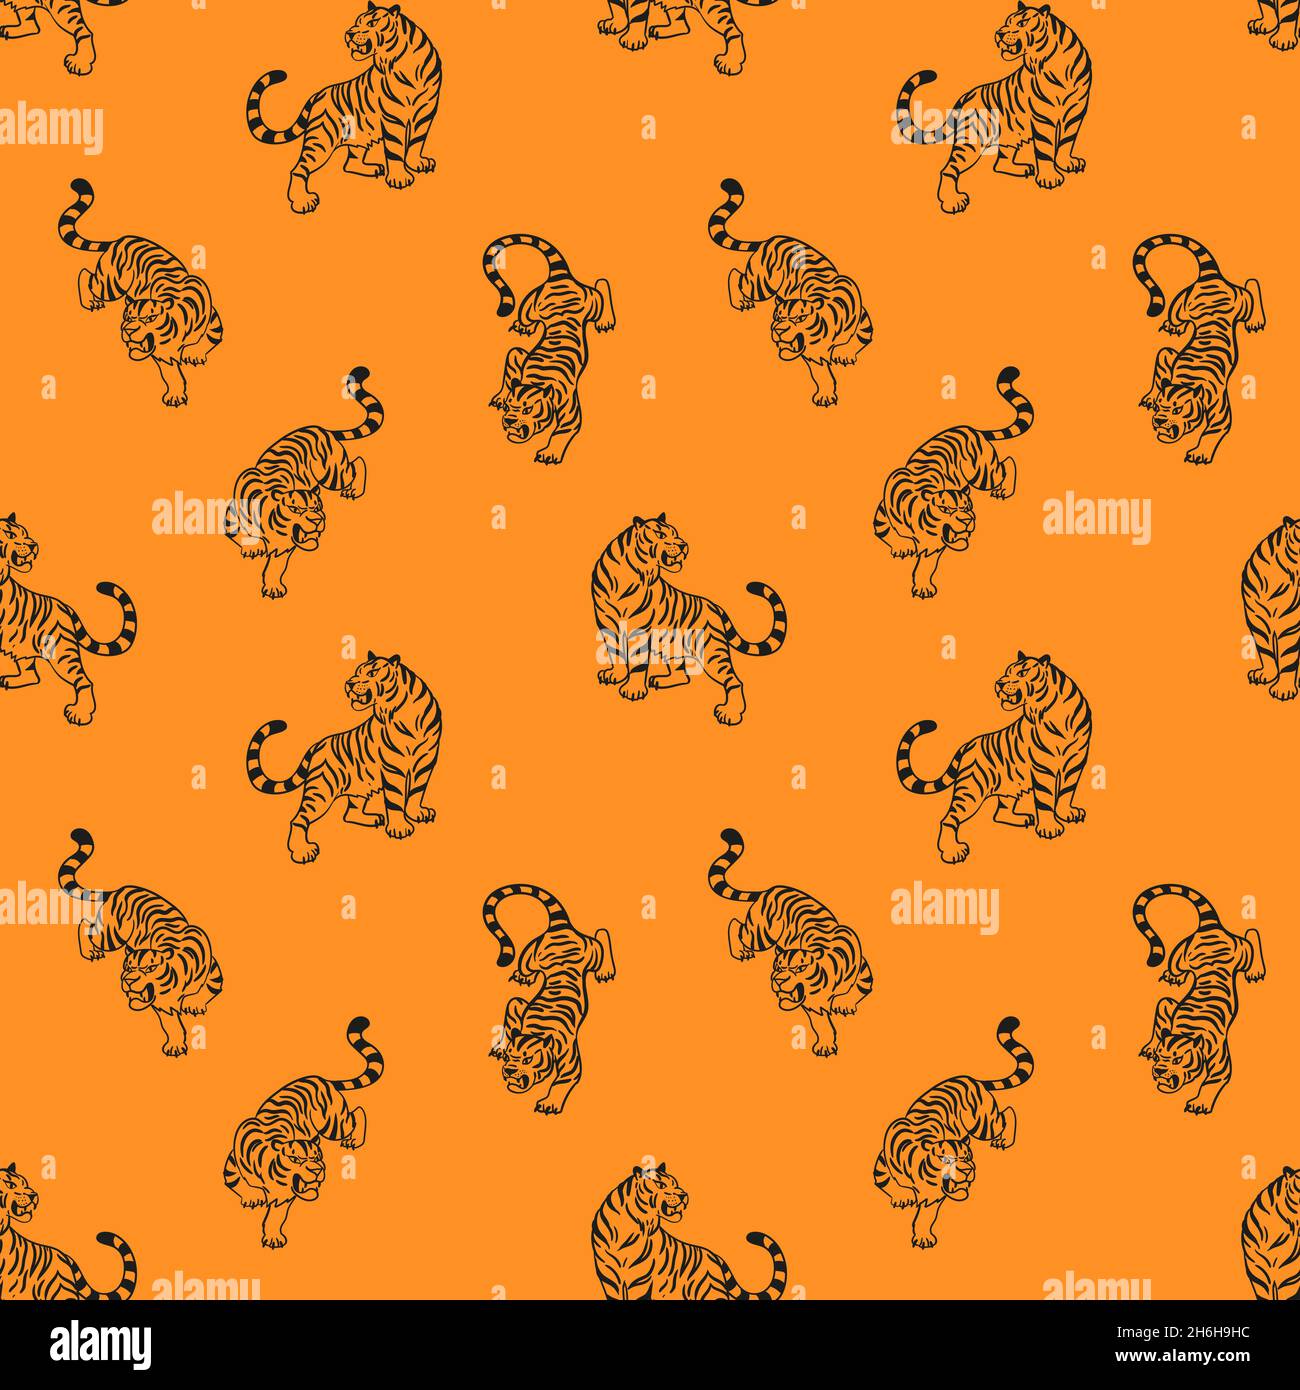 Seamless pattern with graphic tigers. Black and orange predatory wild cats. Vector Print for fabric, clothing, wrapping paper, wallpaper, textile Stock Vector